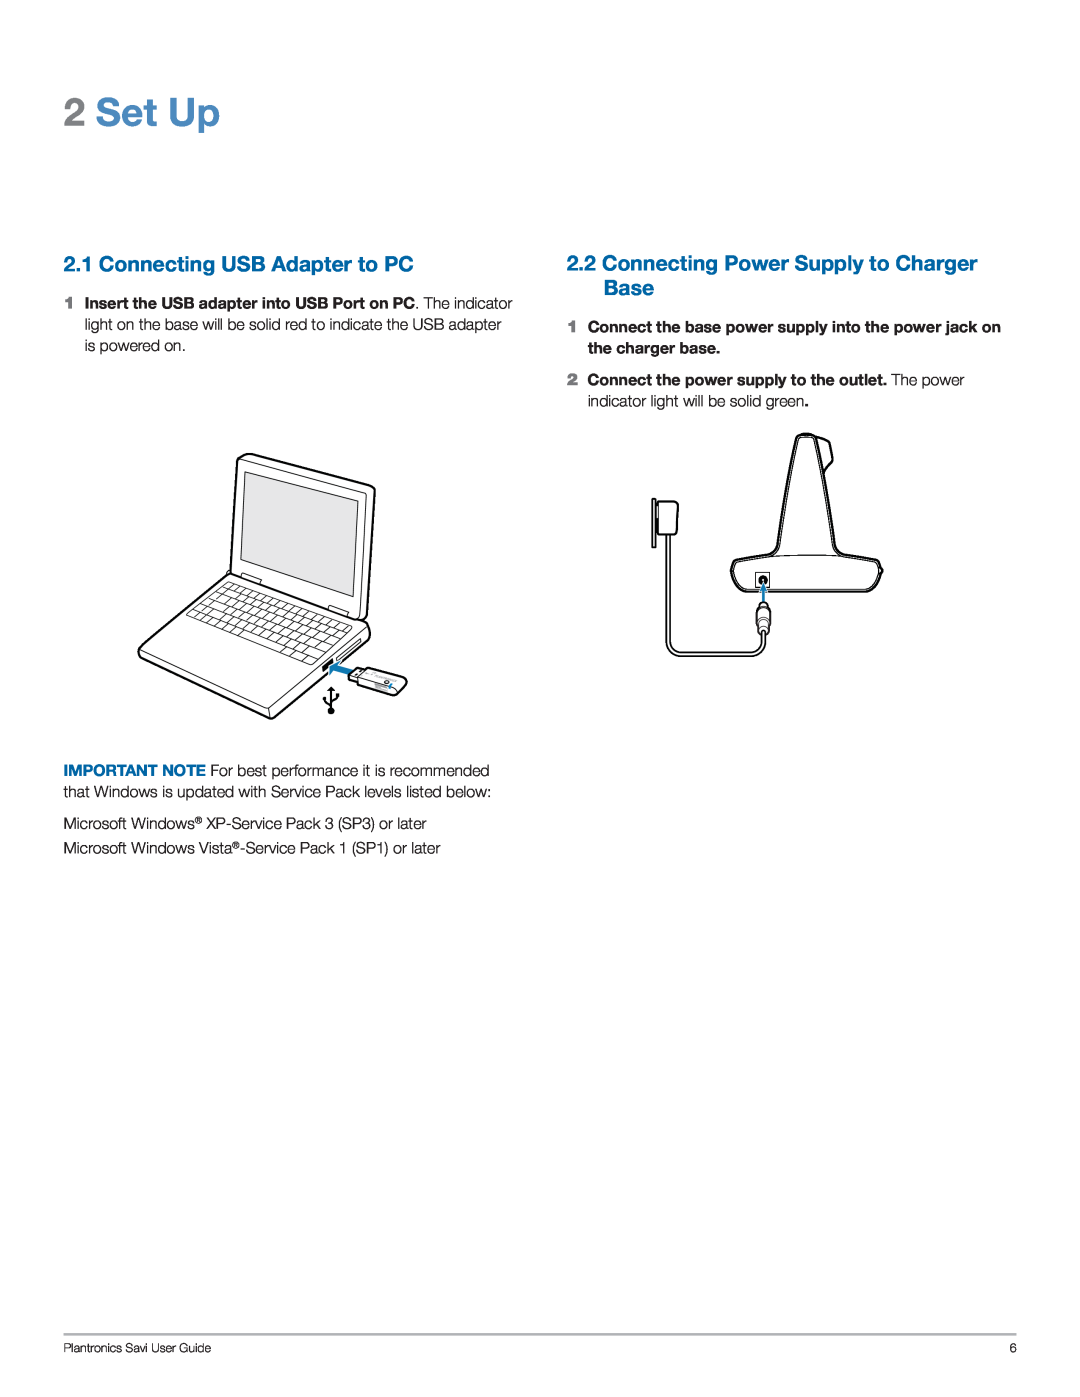 Plantronics WG101/B manual Set Up, Connecting USB Adapter to PC, 2.2Connecting Power Supply to Charger Base 